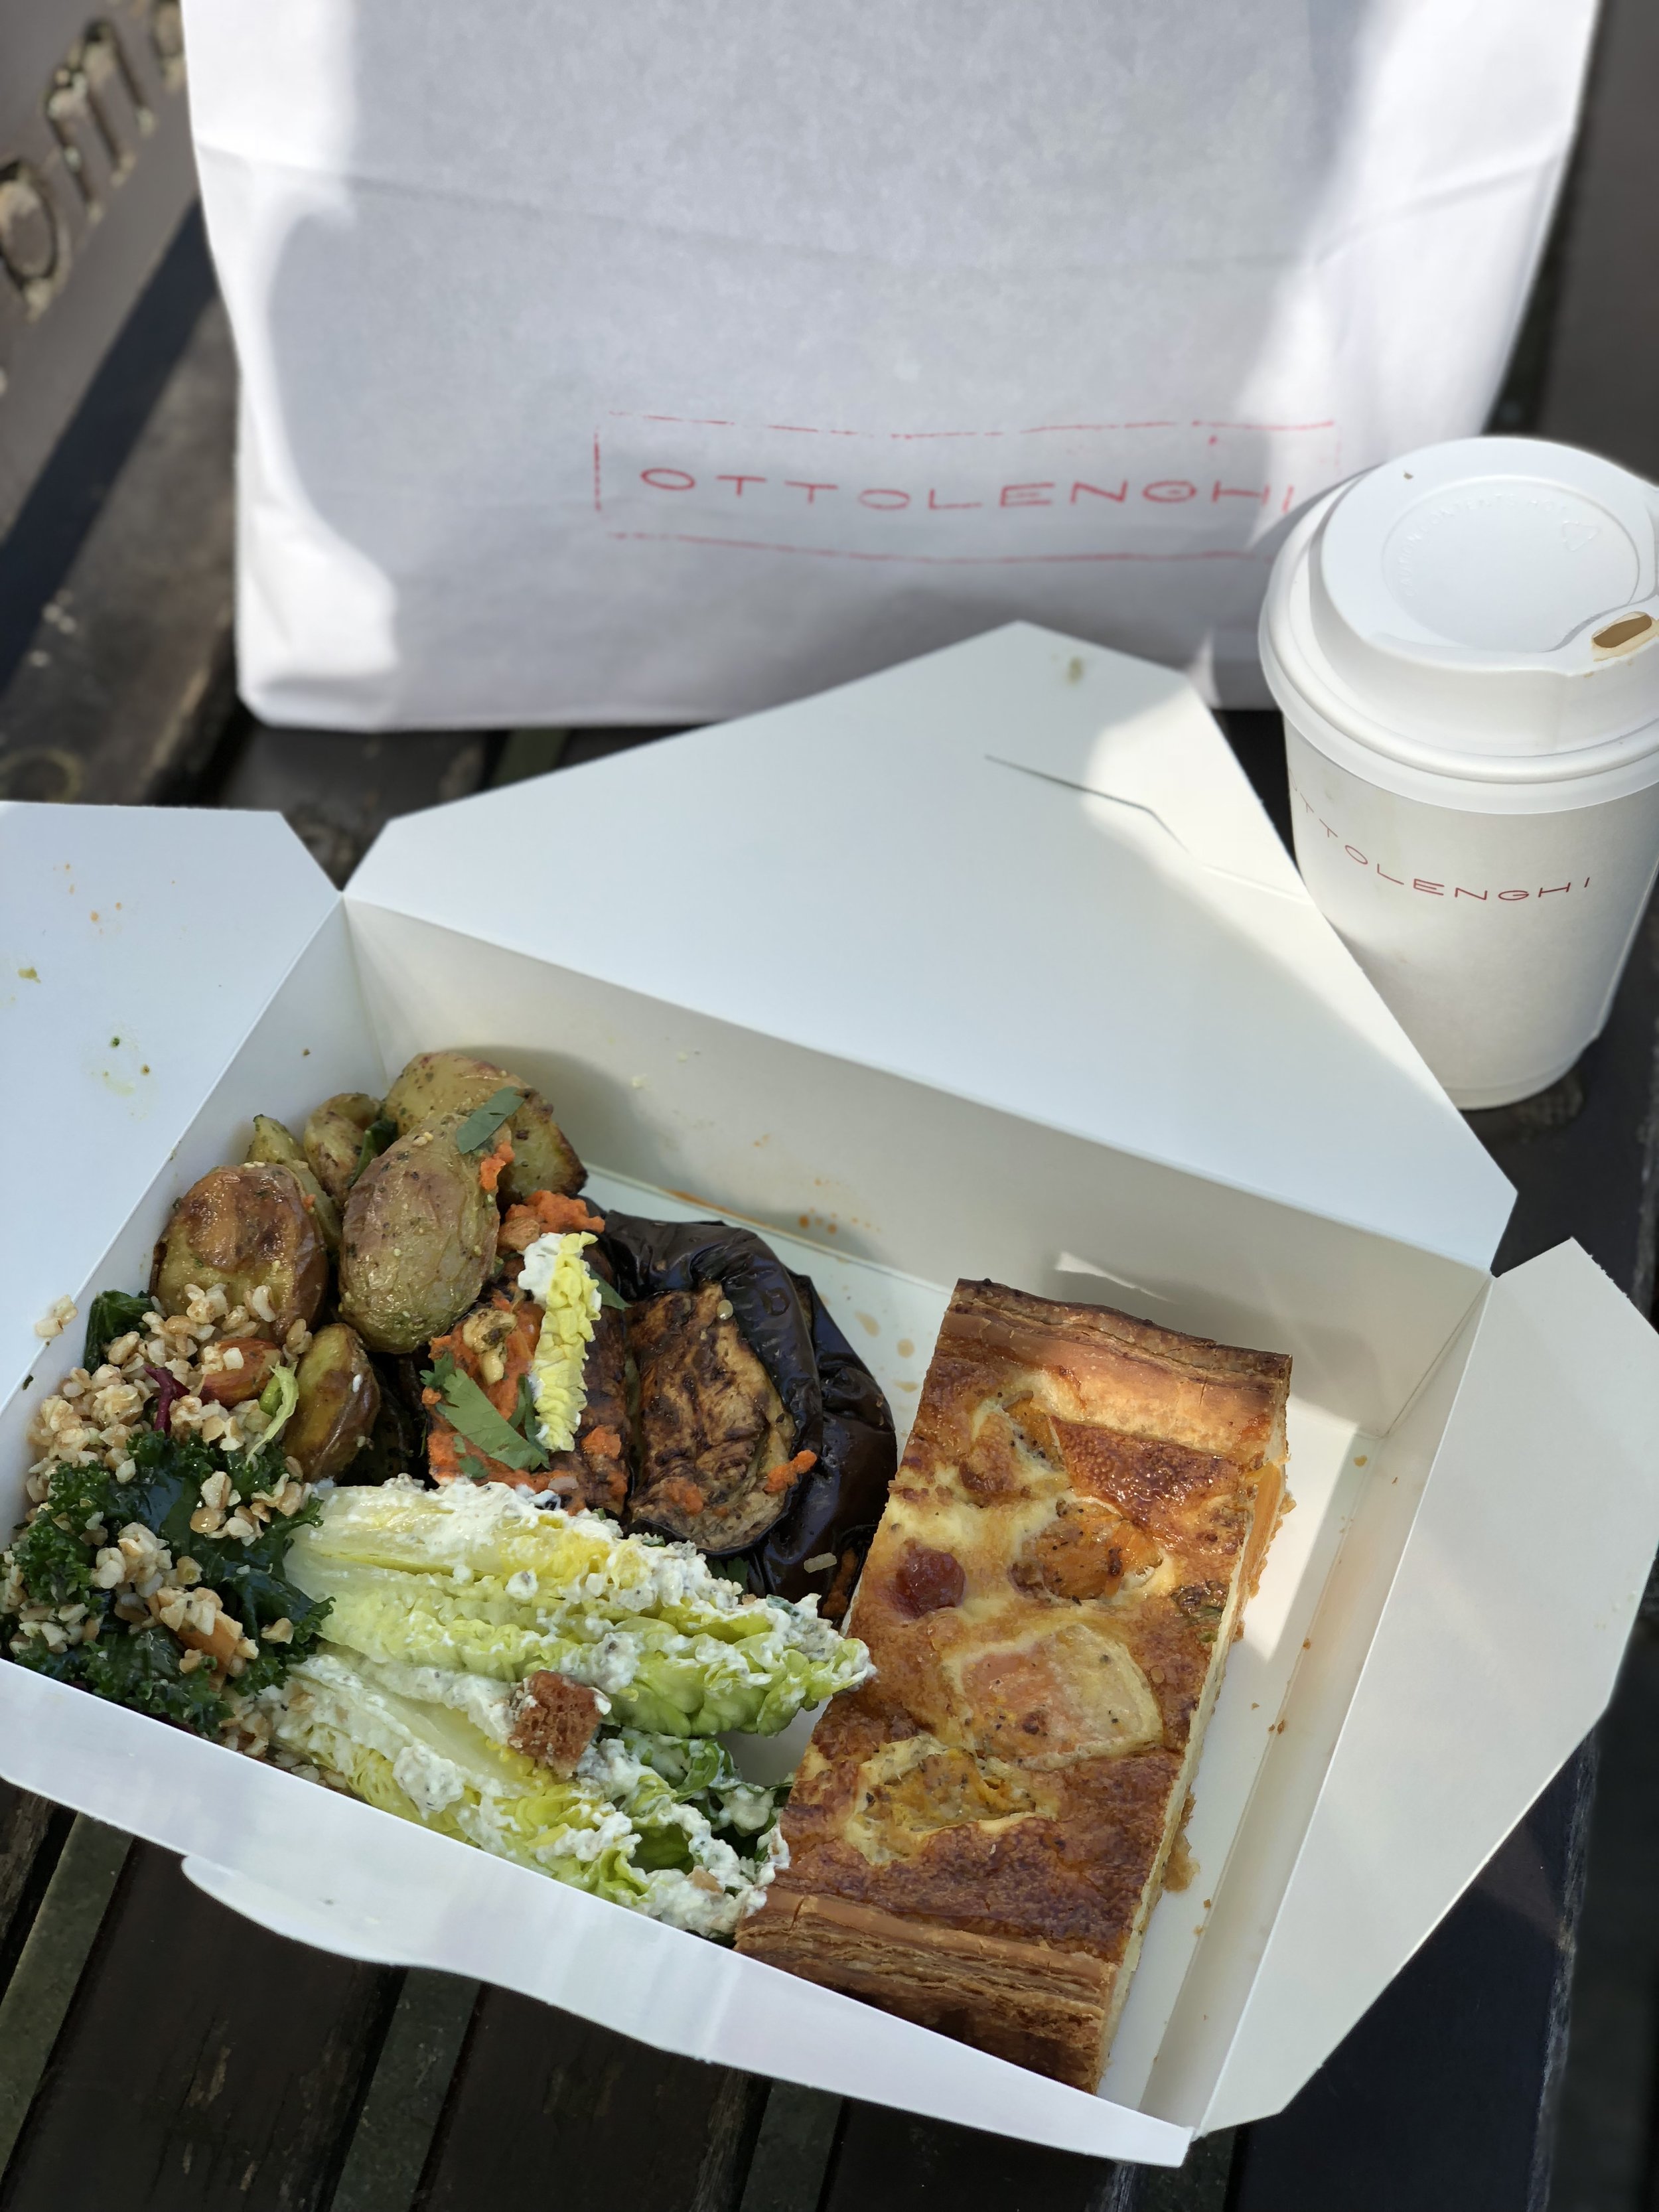 Lunch To-Go from Ottolenghi in London England